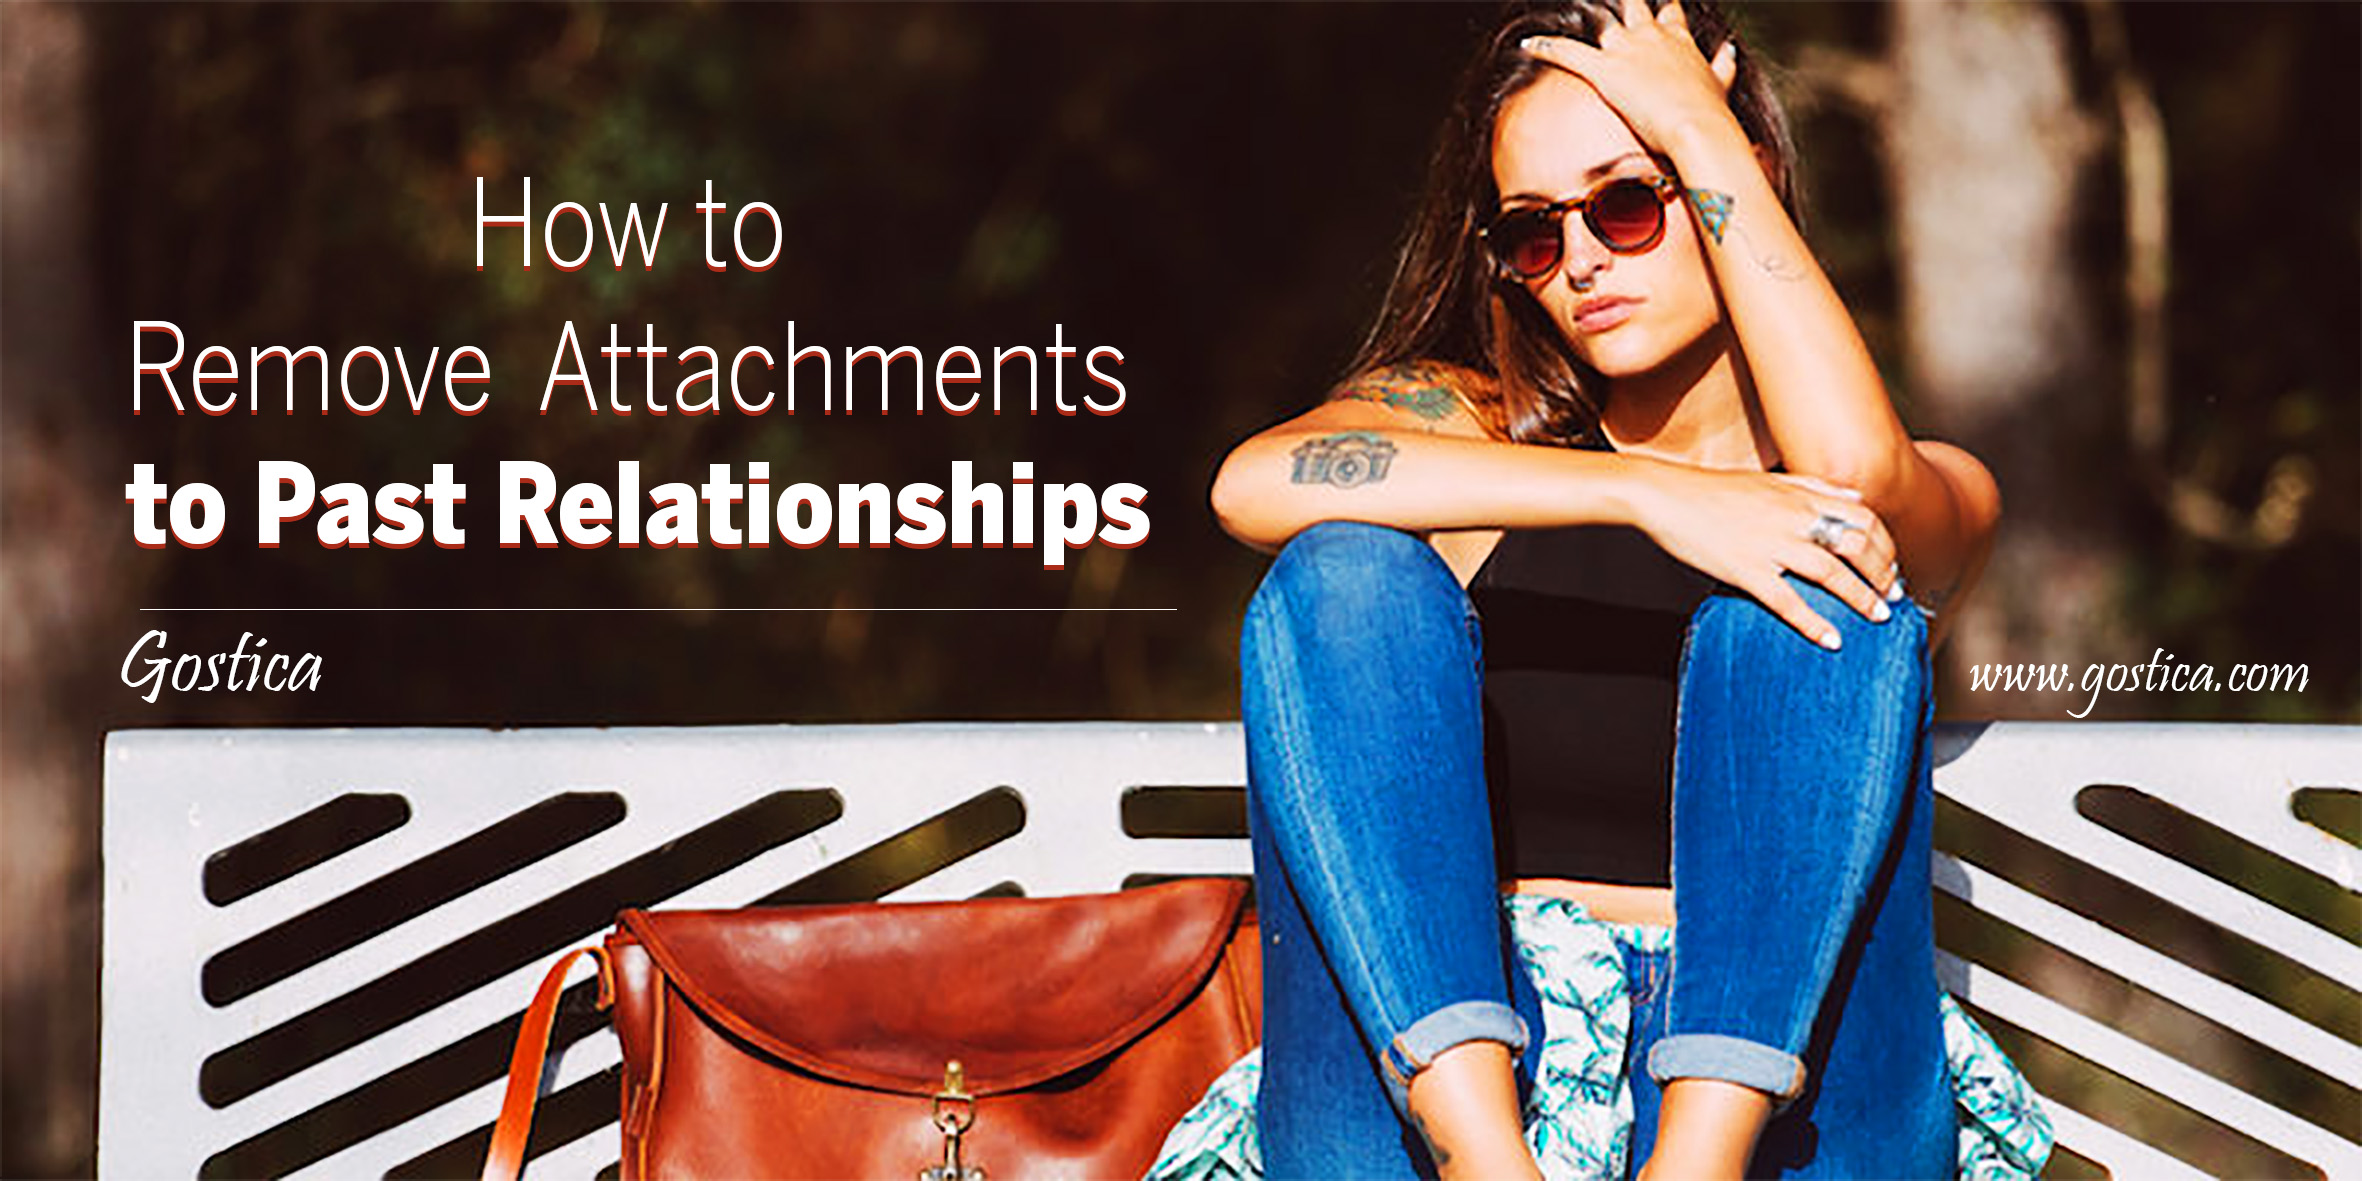 How-to-Remove-Attachments-to-Past-Relationships.jpg